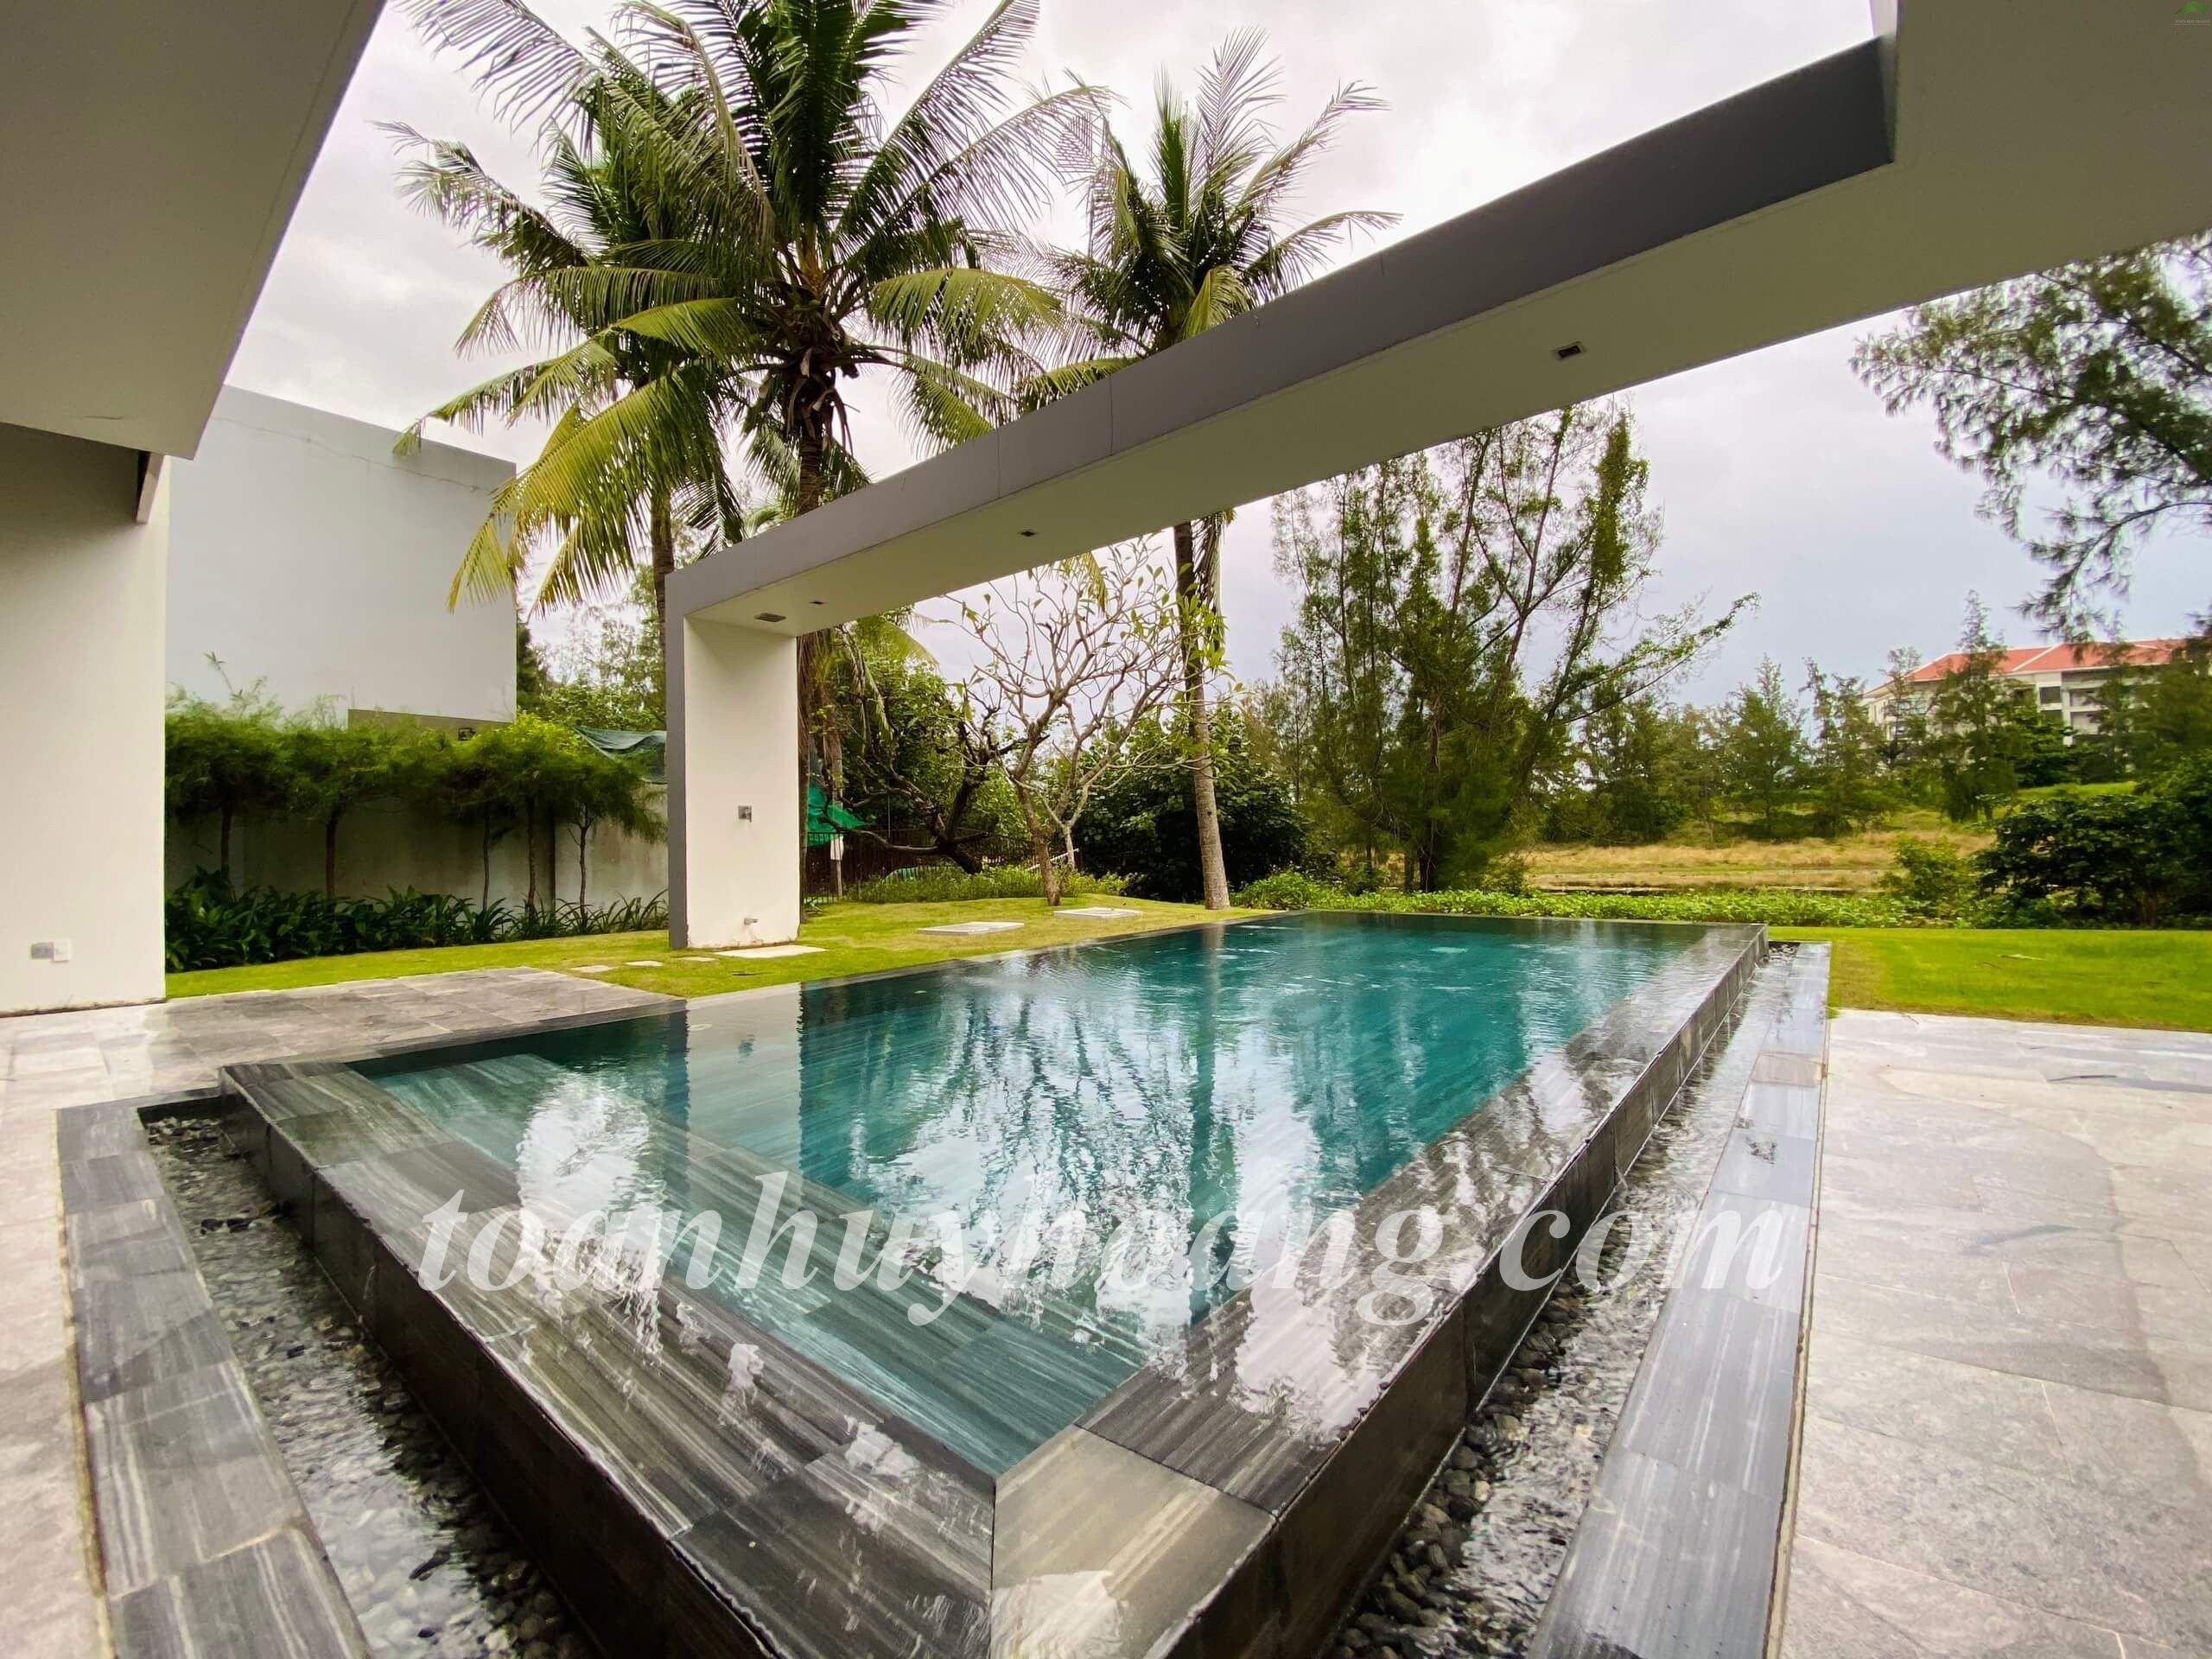 Upgrade your lifestyle in the Extraordinary 3 bedroom Villa